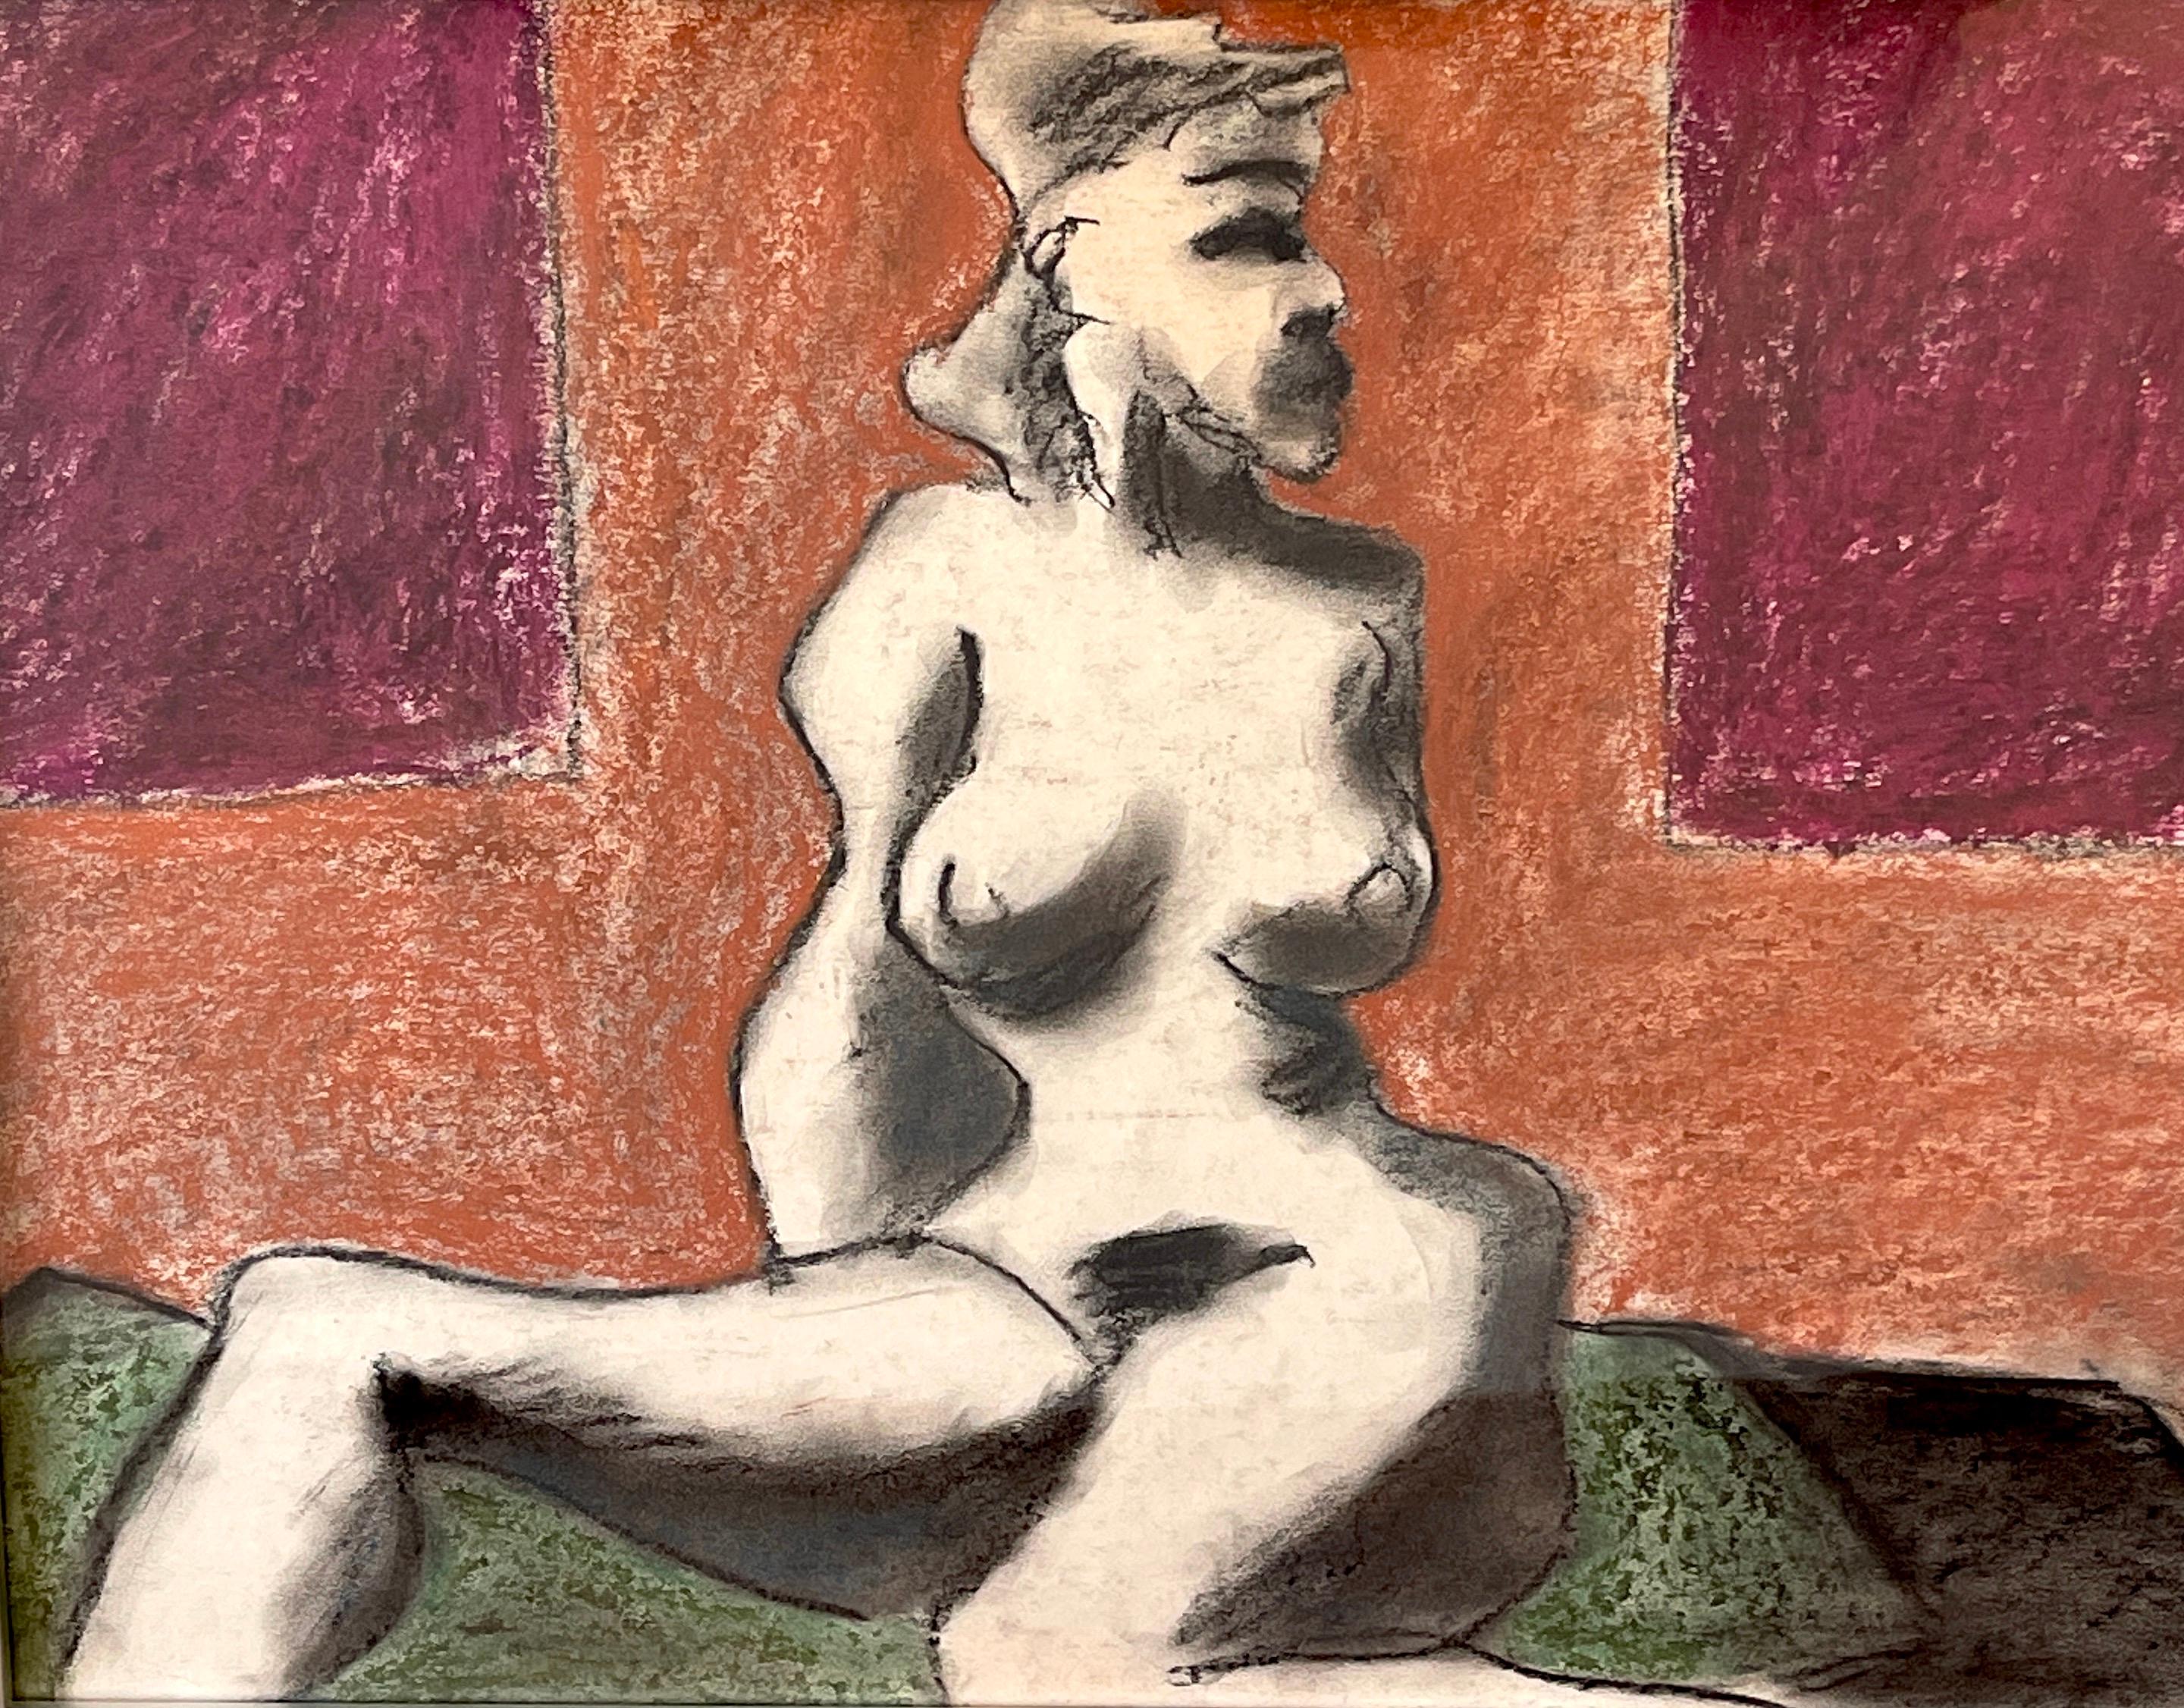 Mid-20th Century 'Seated Female Nude' Oil/Mixed Media on Paper, 1960s by Douglas D. Peden For Sale